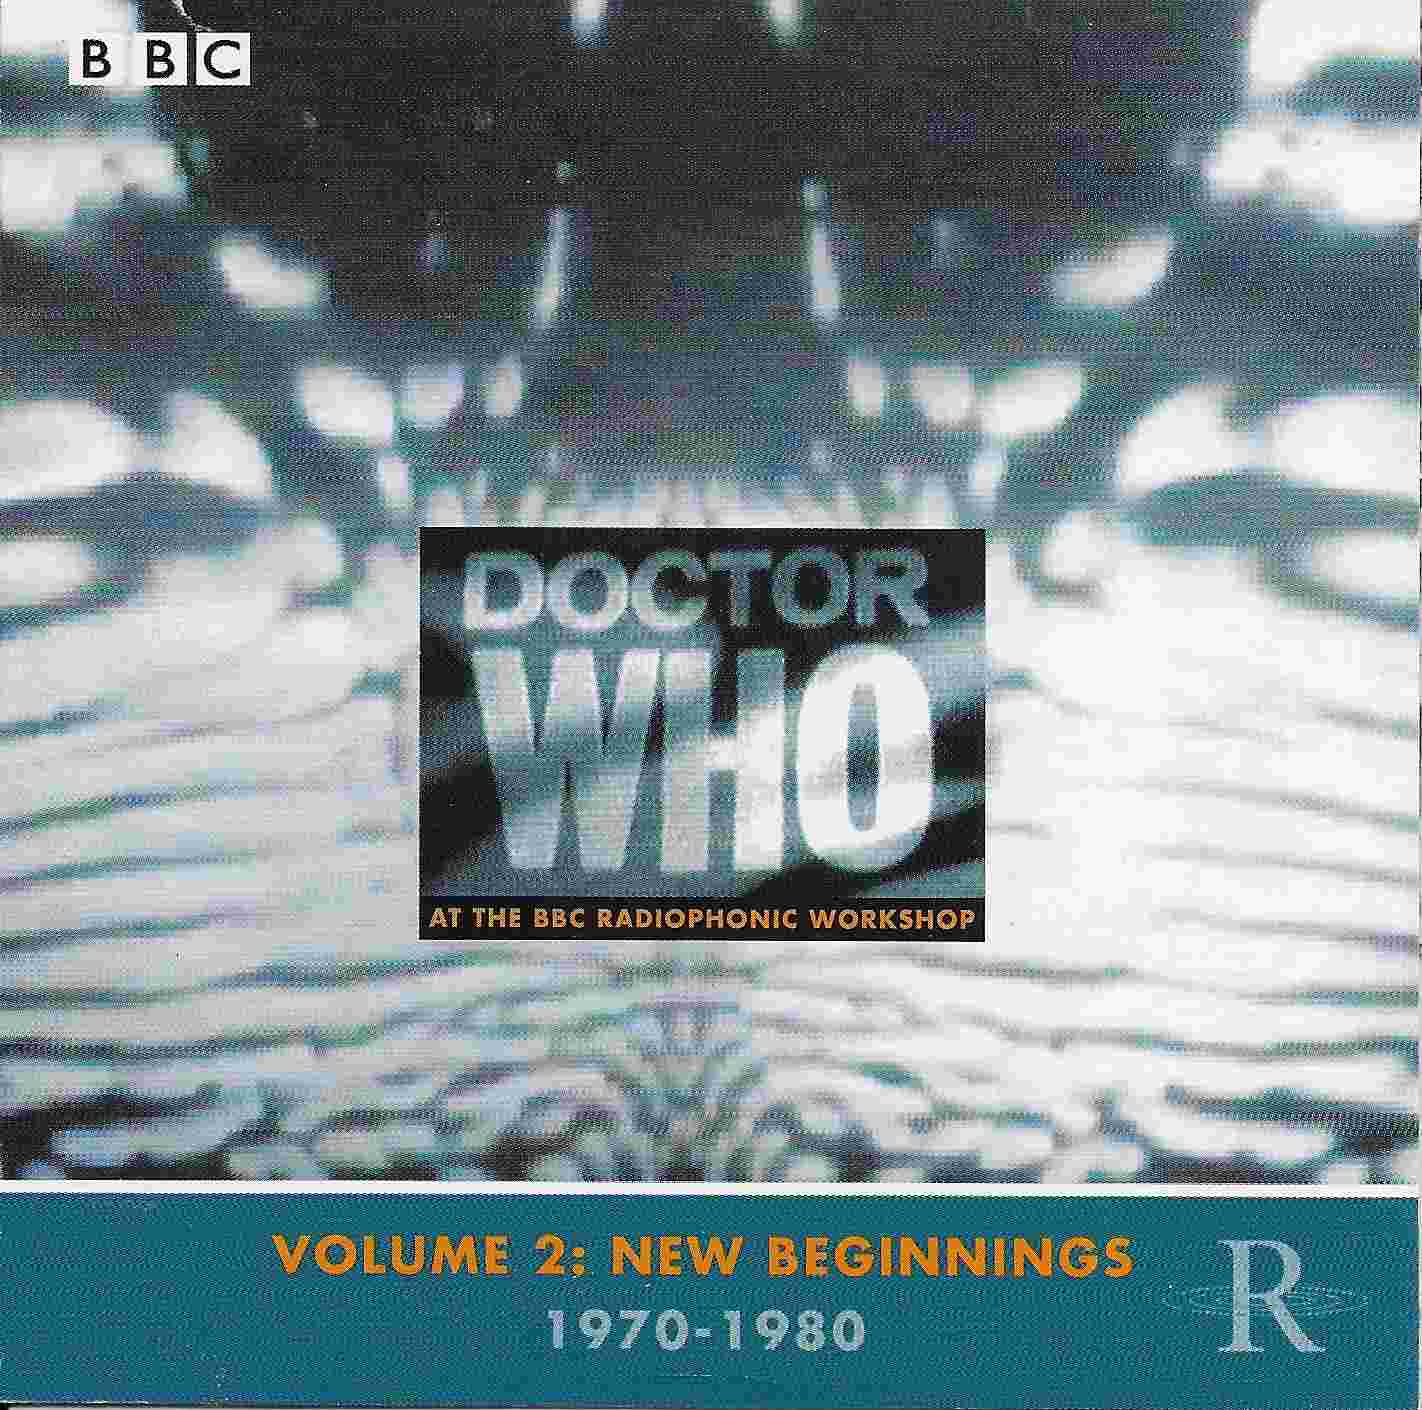 Picture of Doctor Who - At the radiophonic workshop - Volume 2 by artist Various from the BBC cds - Records and Tapes library